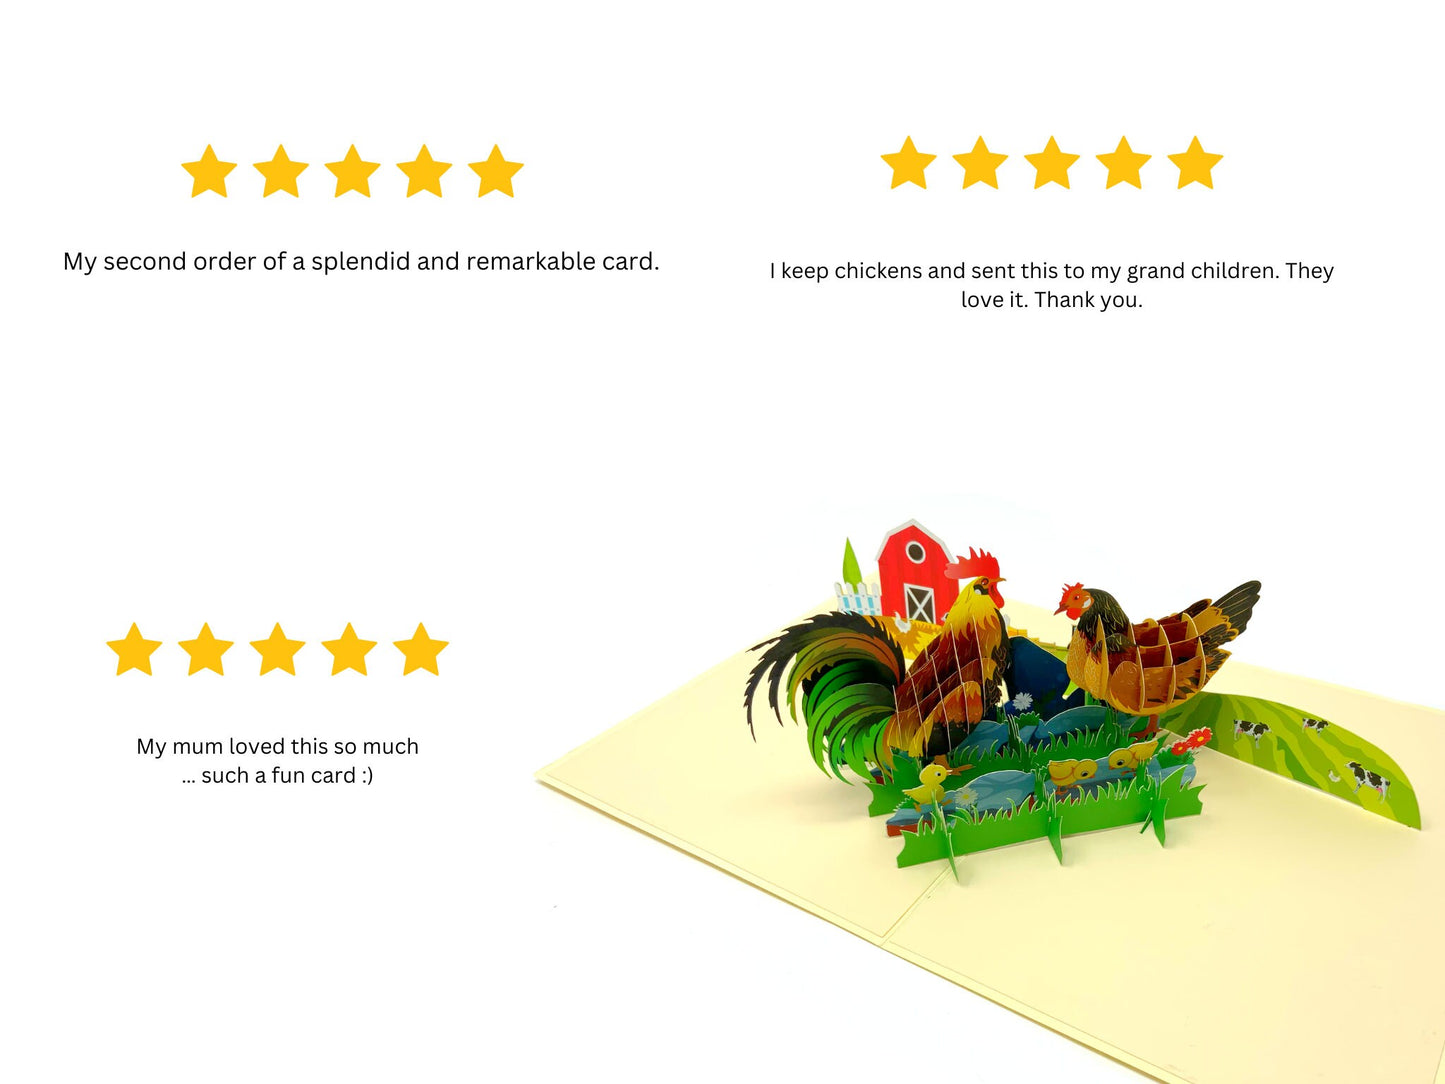 &quot;Two chickens pop-up card with 5-star reviews: A three-dimensional card featuring two charming chicken characters, alongside multiple 5-star ratings, indicating high customer satisfaction.&quot;